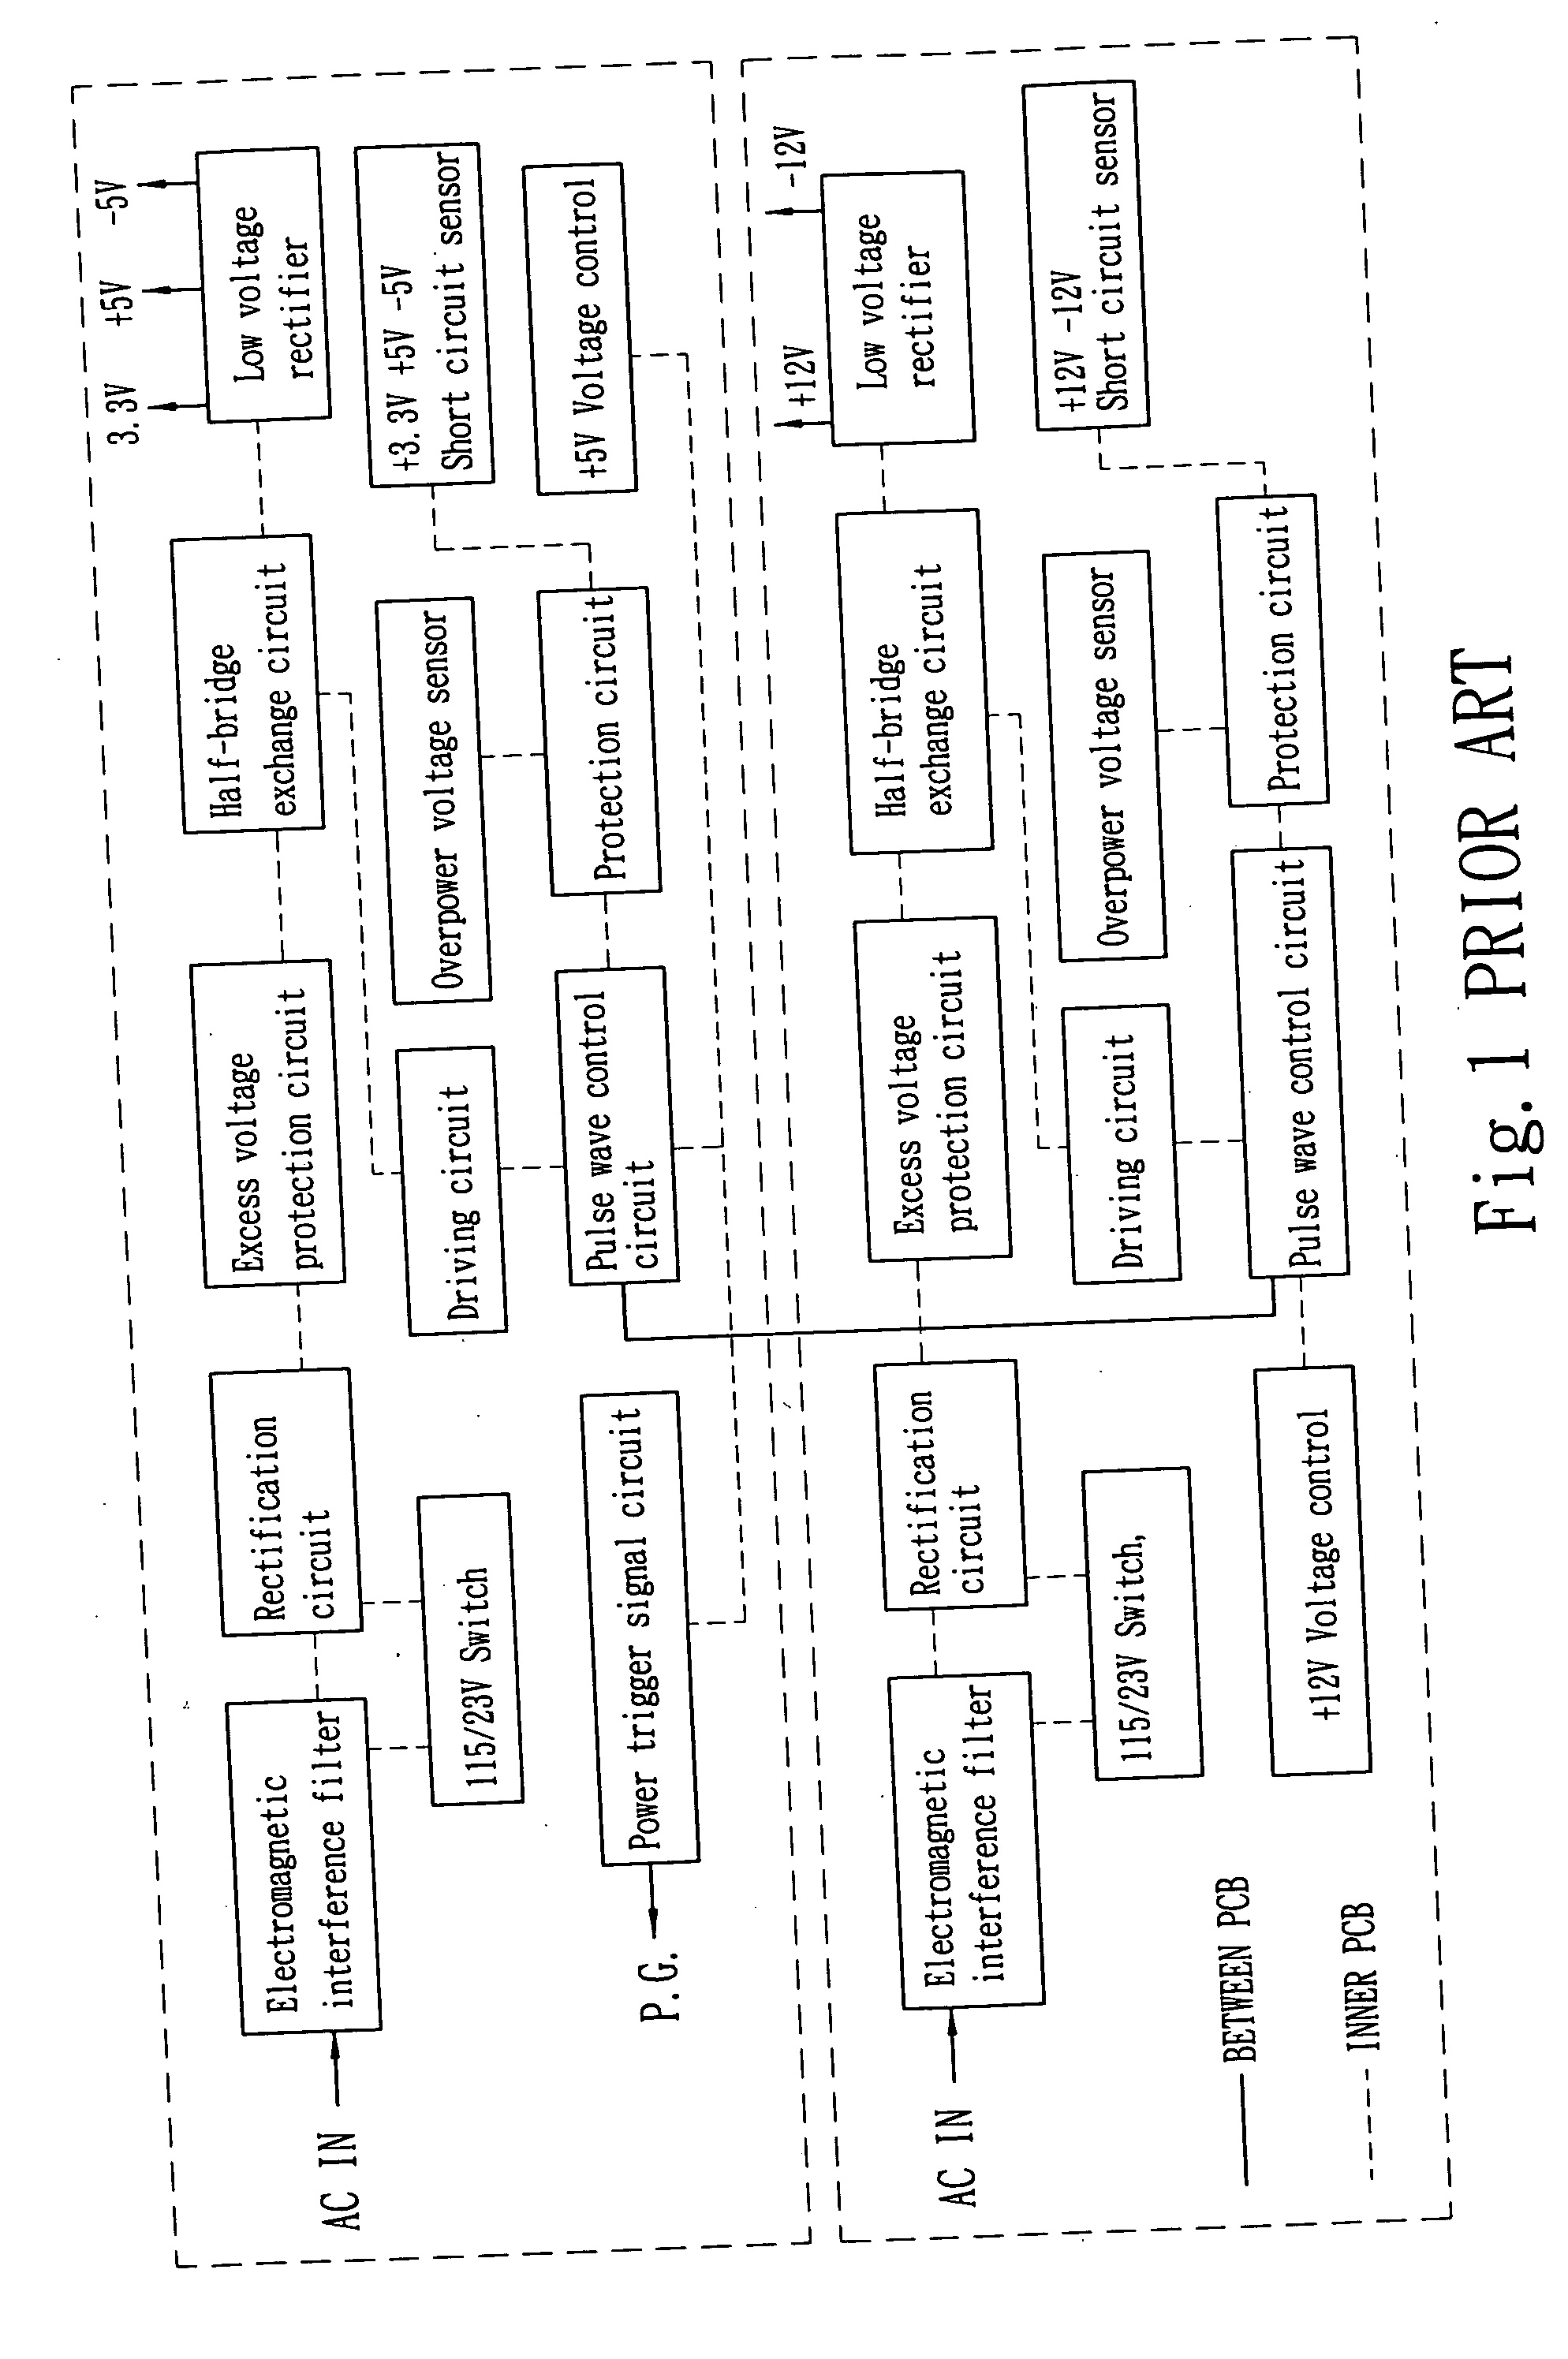 Chain reaction control circuit for parallel power supply